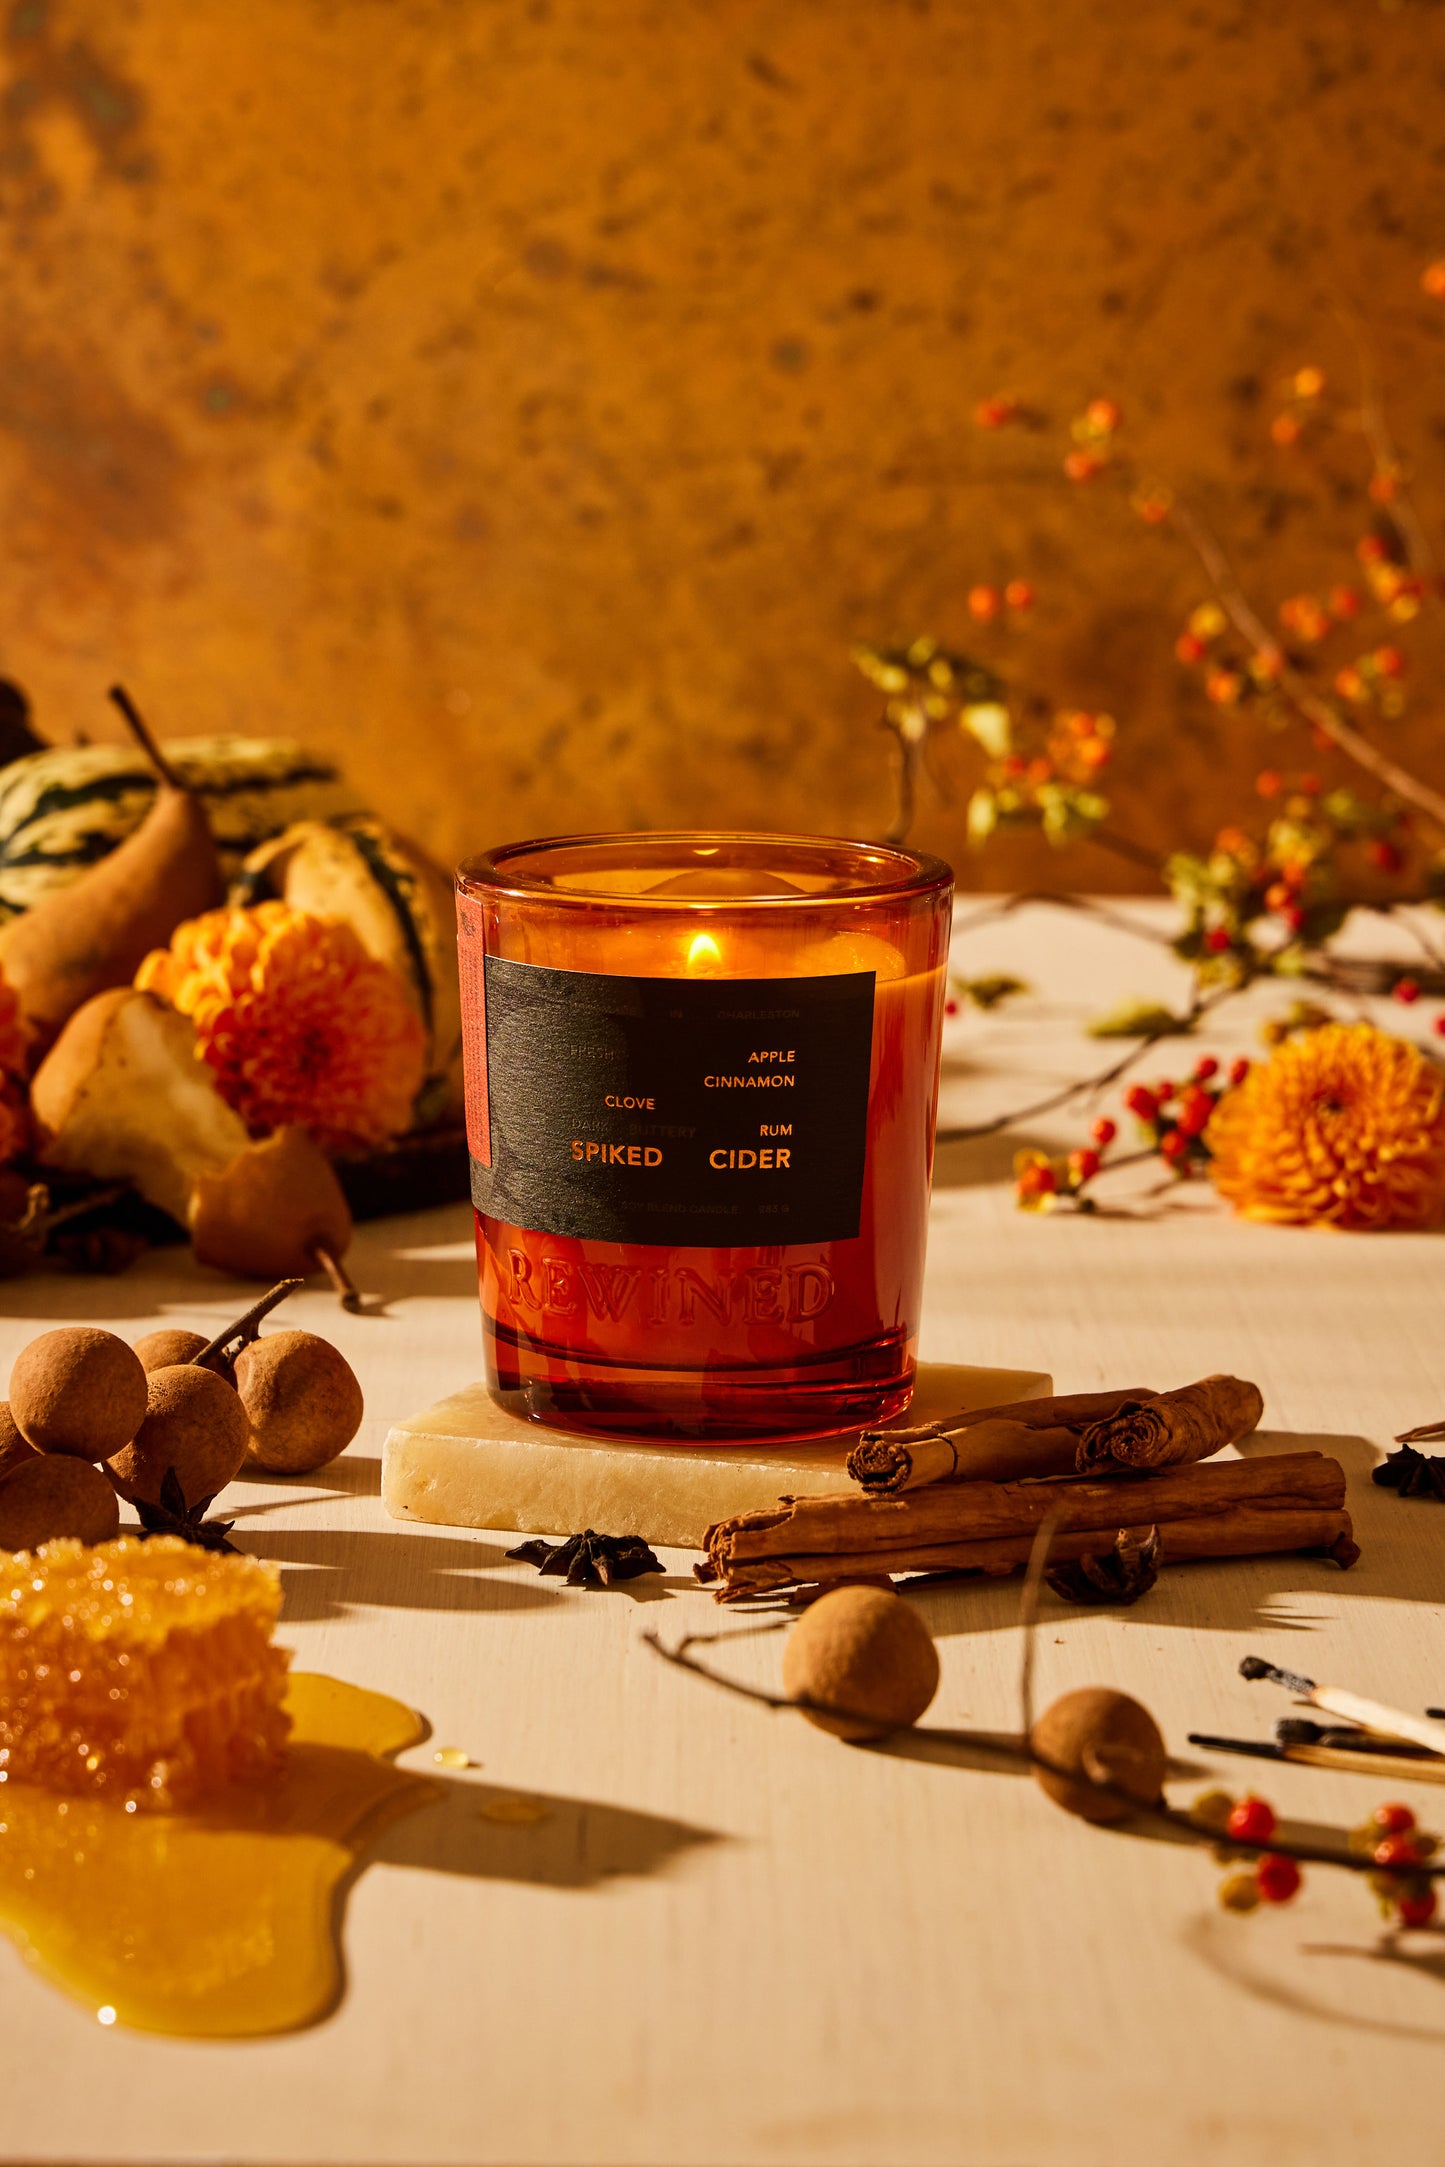 Rewined Spiked Cider Candle 6oz